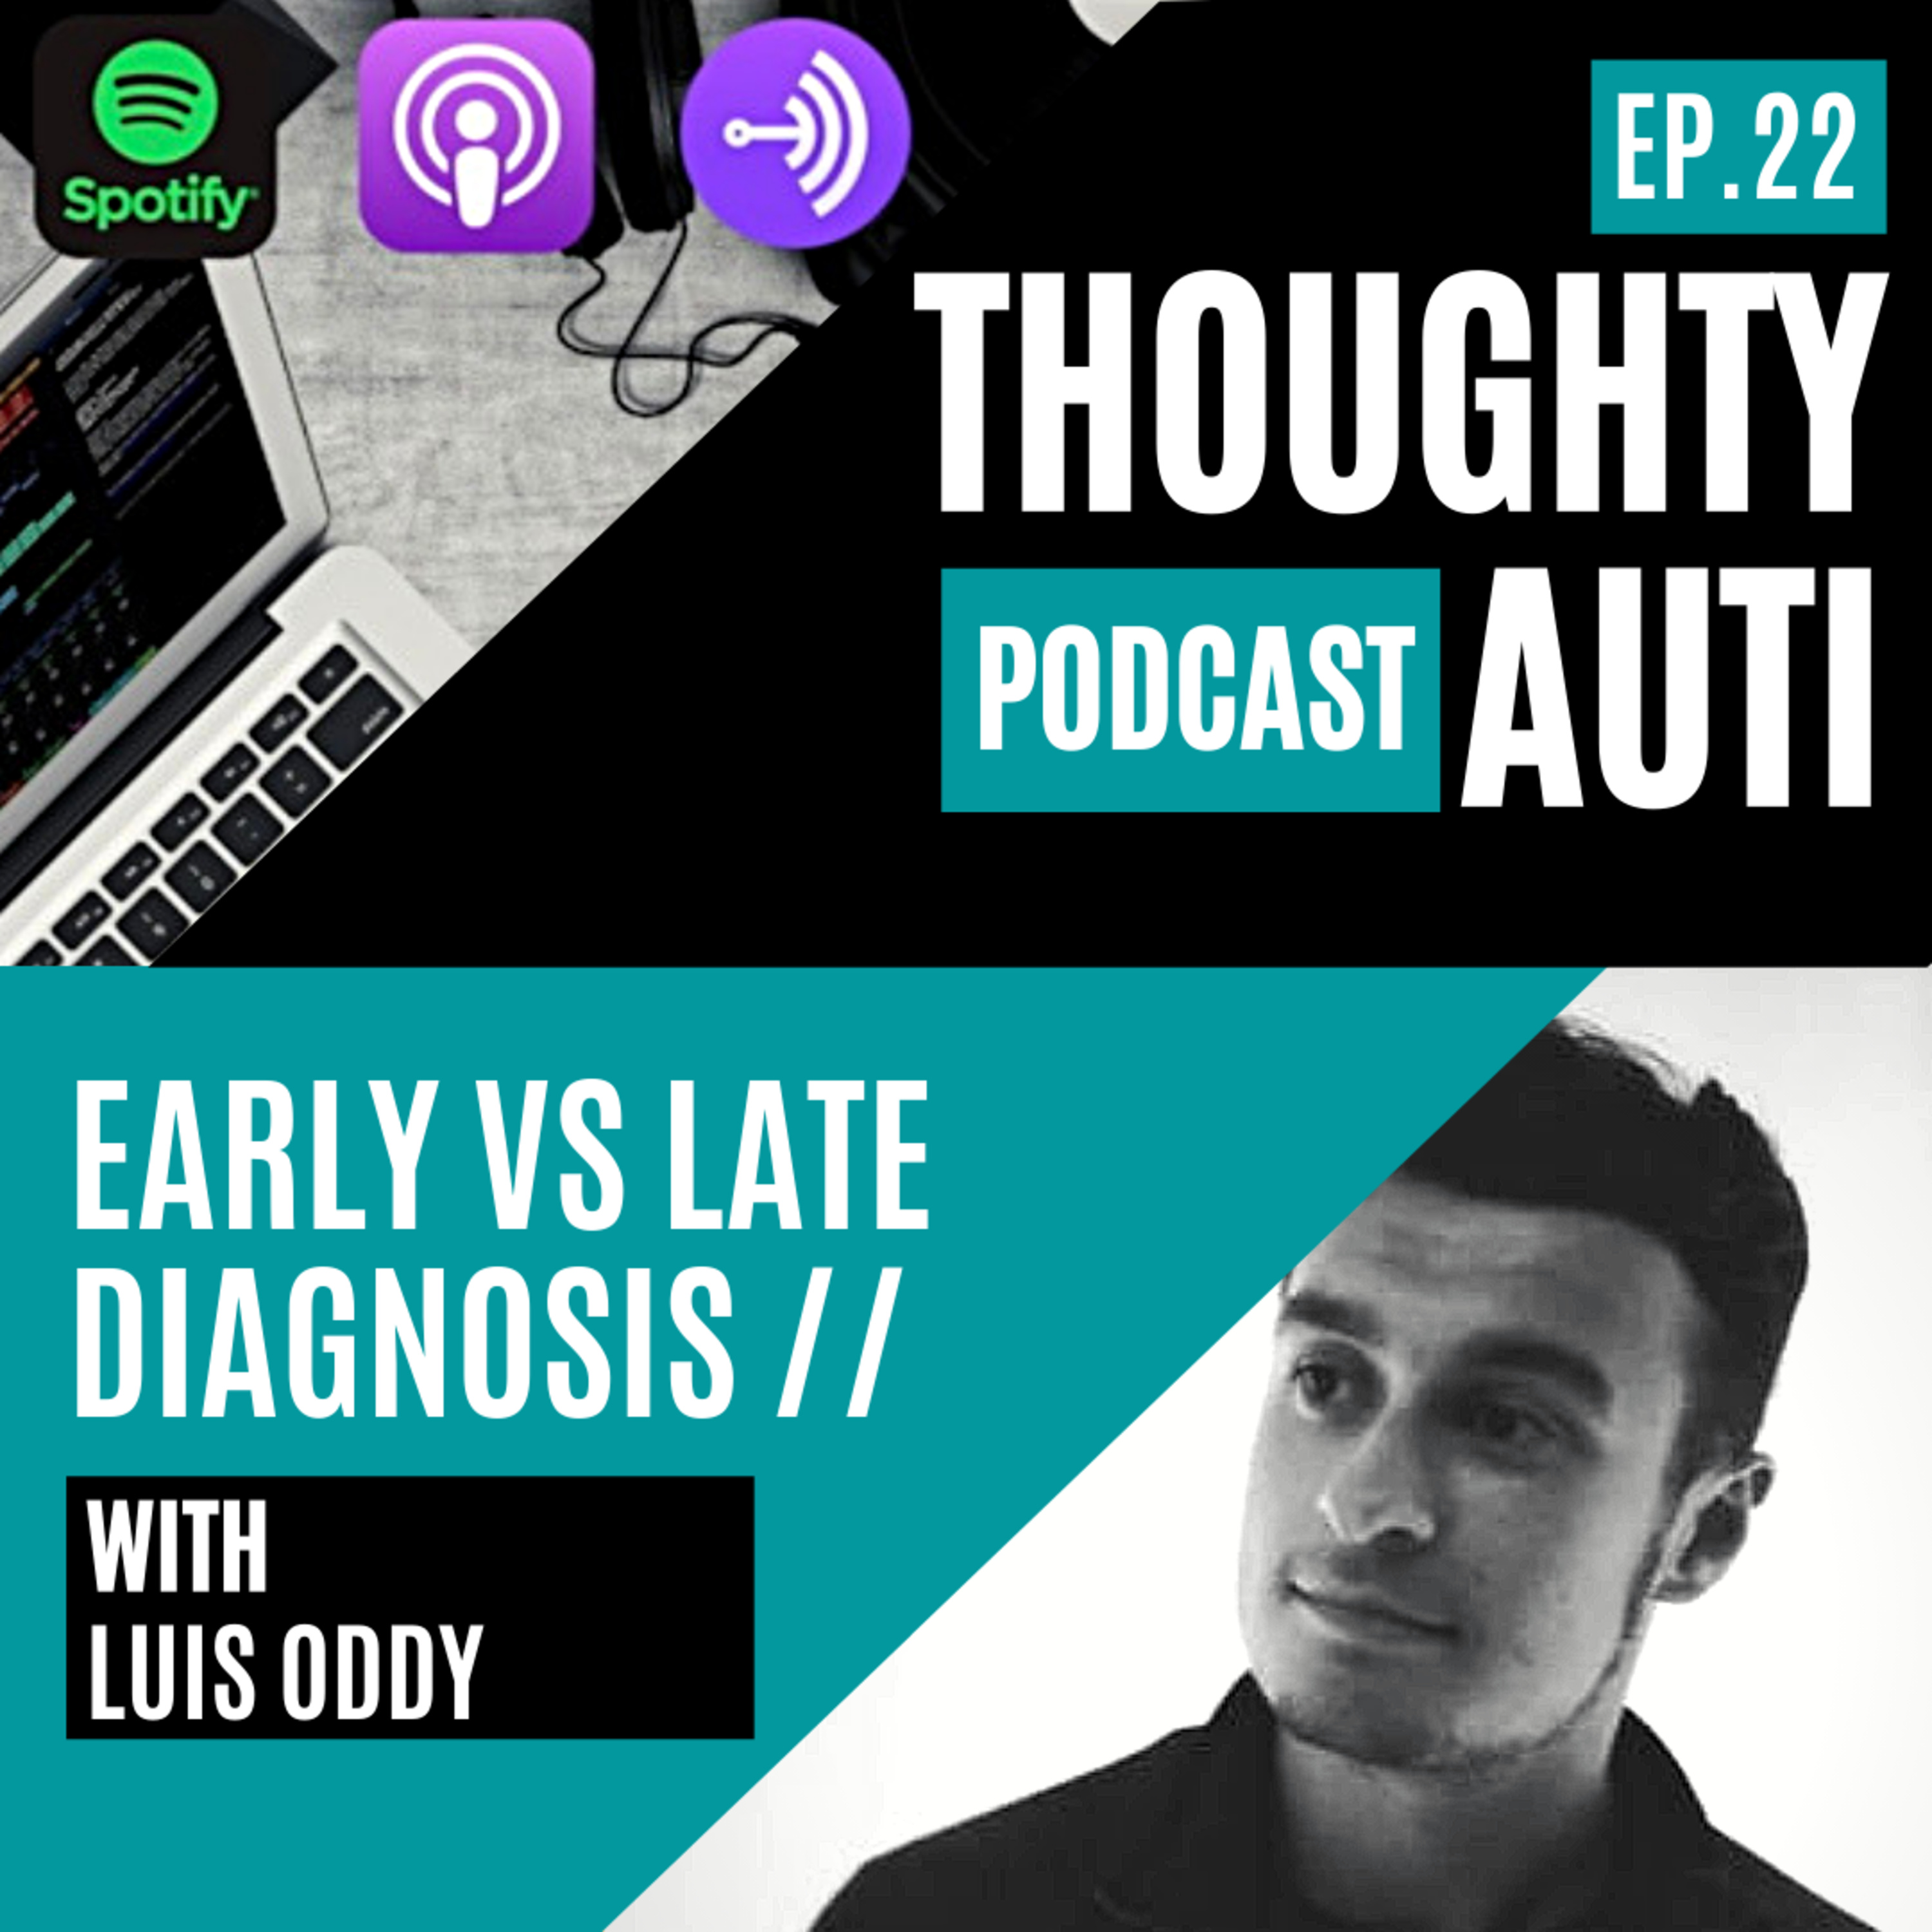 Should I Get My Child Diagnosed With Autism? - Autistic Adults Discuss Early Vs Late Diagnosis w/Luis Oddy